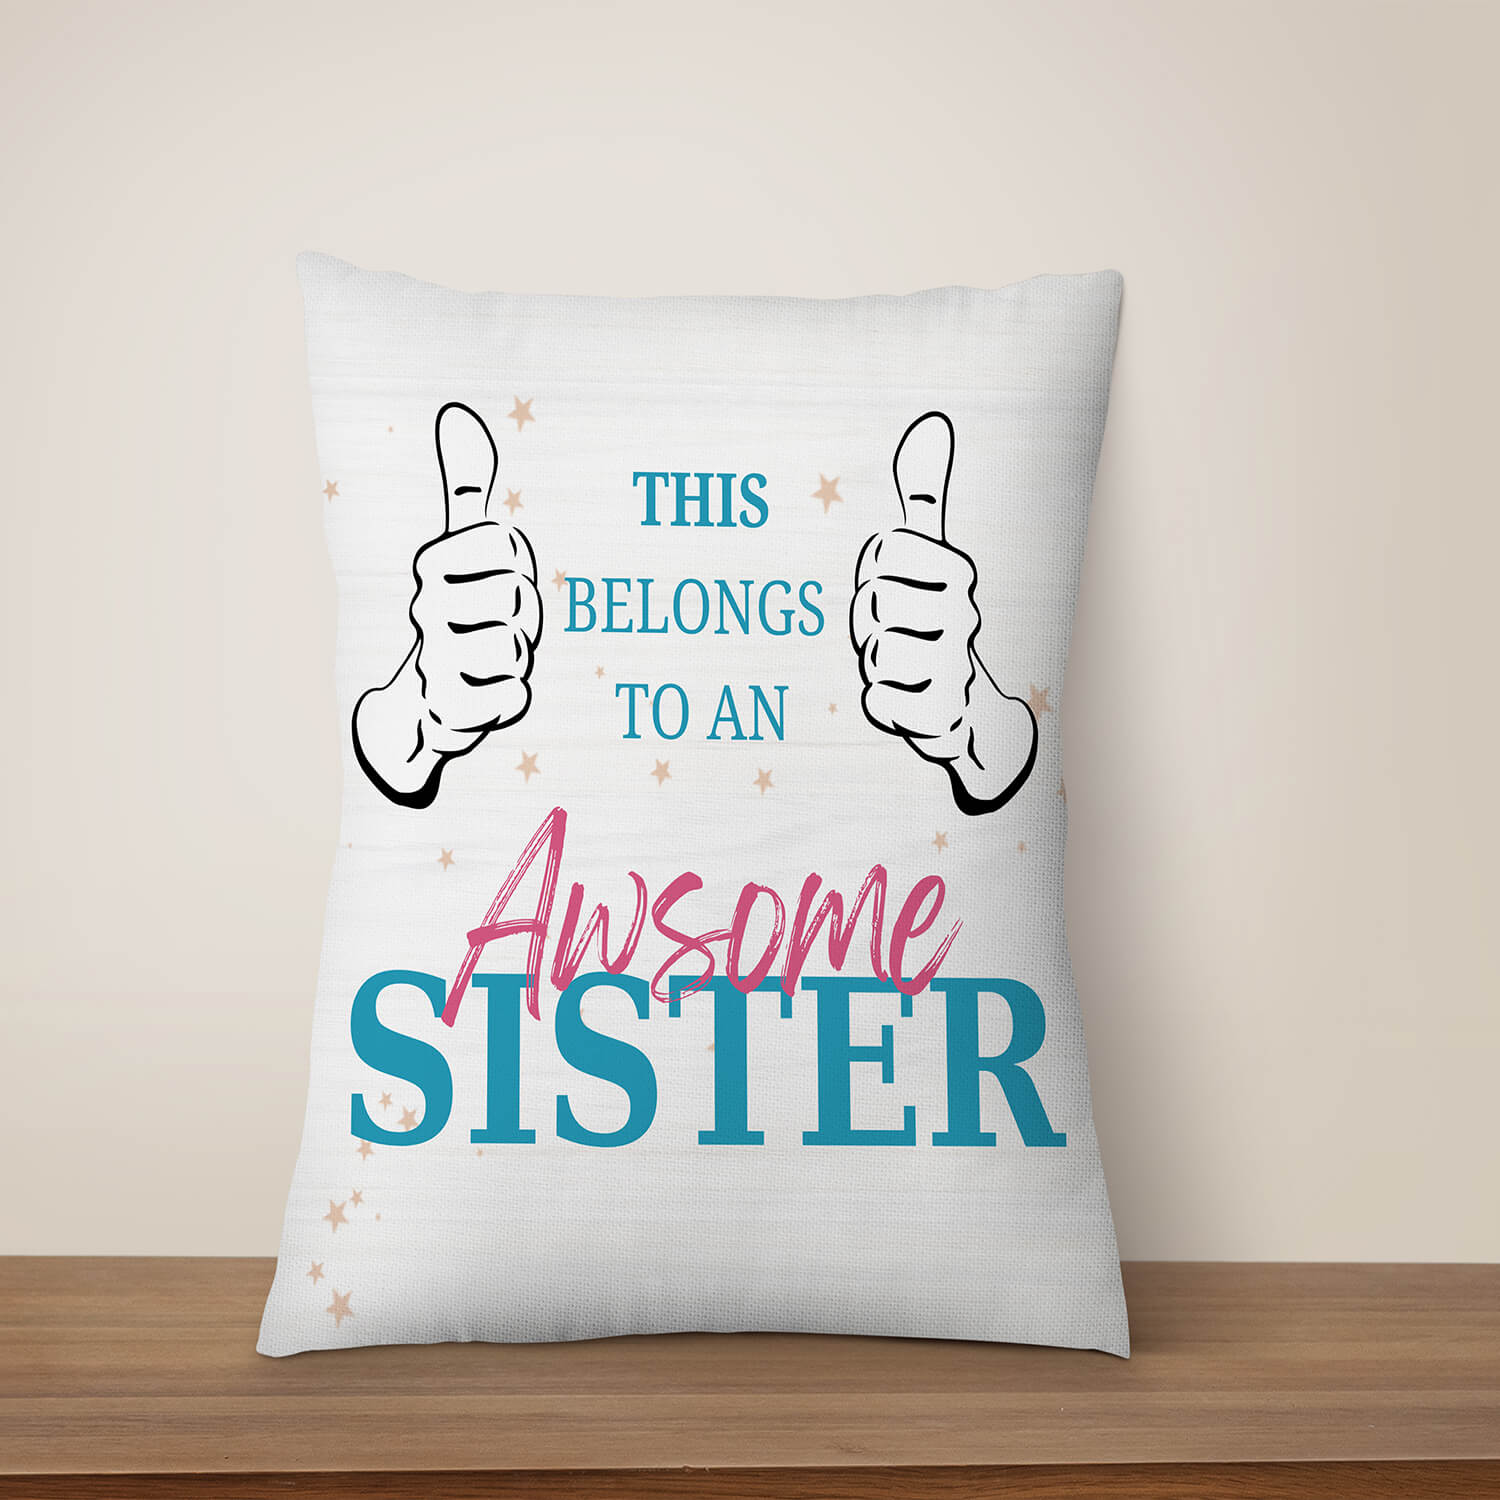 Printed Decorative Throw Pillow Cushion Cover & Filler for Gifts Sister Rakhi Gift Birthday Gift (12 inch x 12 inch, )